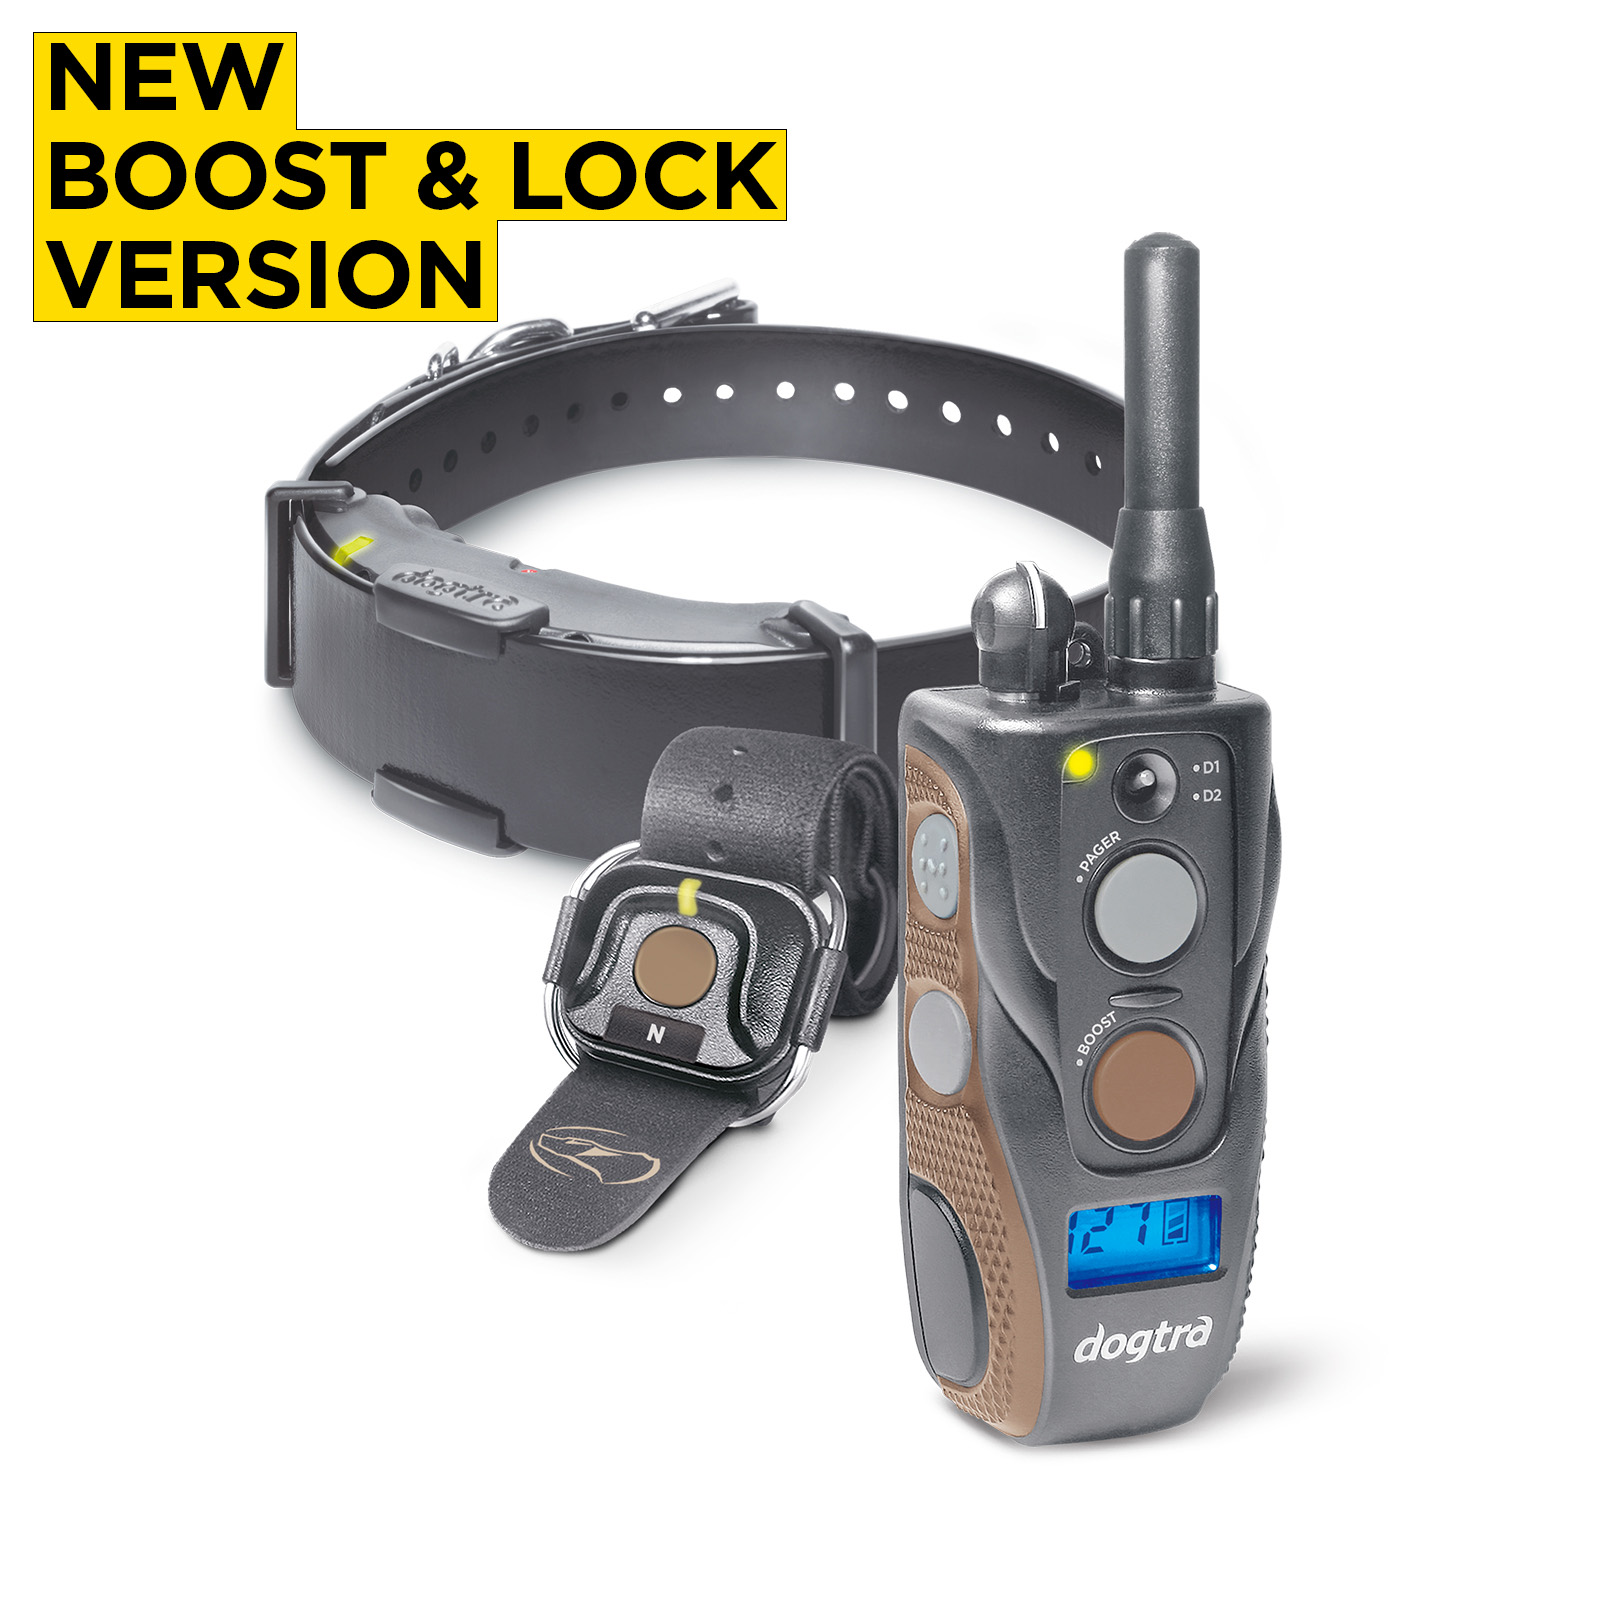 SportDOG Brand SportTrainer 1275 Shock Collar - 3/4 Mile Range - OLED  Screen - Waterproof, Rechargeable E-Collar with Remote - Train with Tone